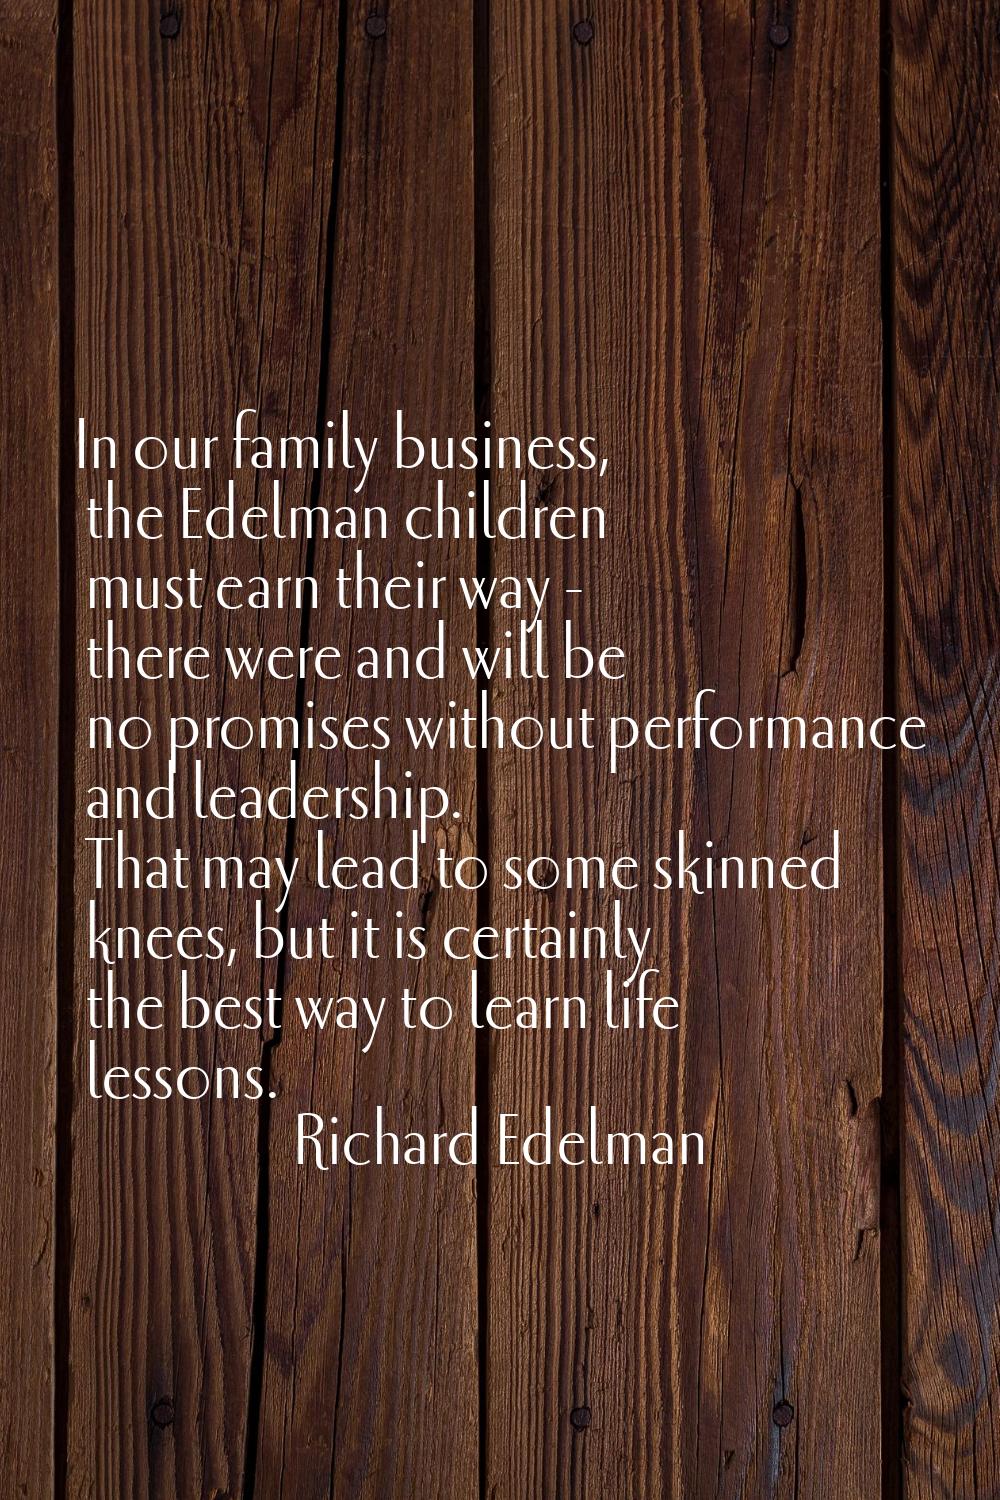 In our family business, the Edelman children must earn their way - there were and will be no promis